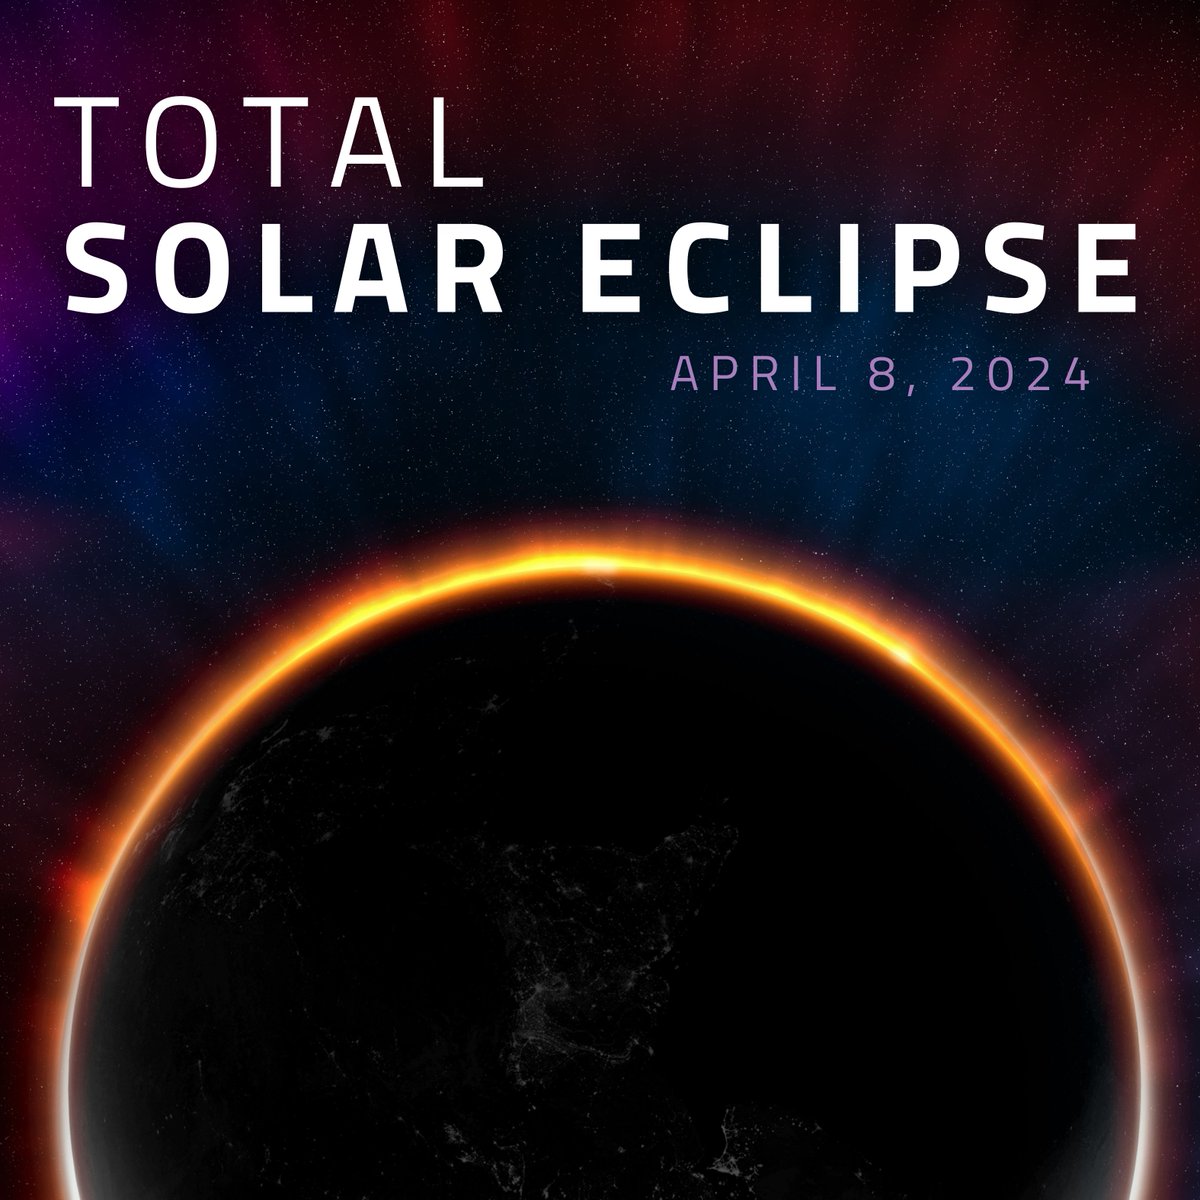 The 2024 Total Solar Eclipse is only 4️⃣ days away! Since April 8th is a Teacher Workday, students won't be on campus. However, every student will be sent home with protective glasses. For more info on safely viewing the solar eclipse, visit: science.nasa.gov/eclipses/futur…